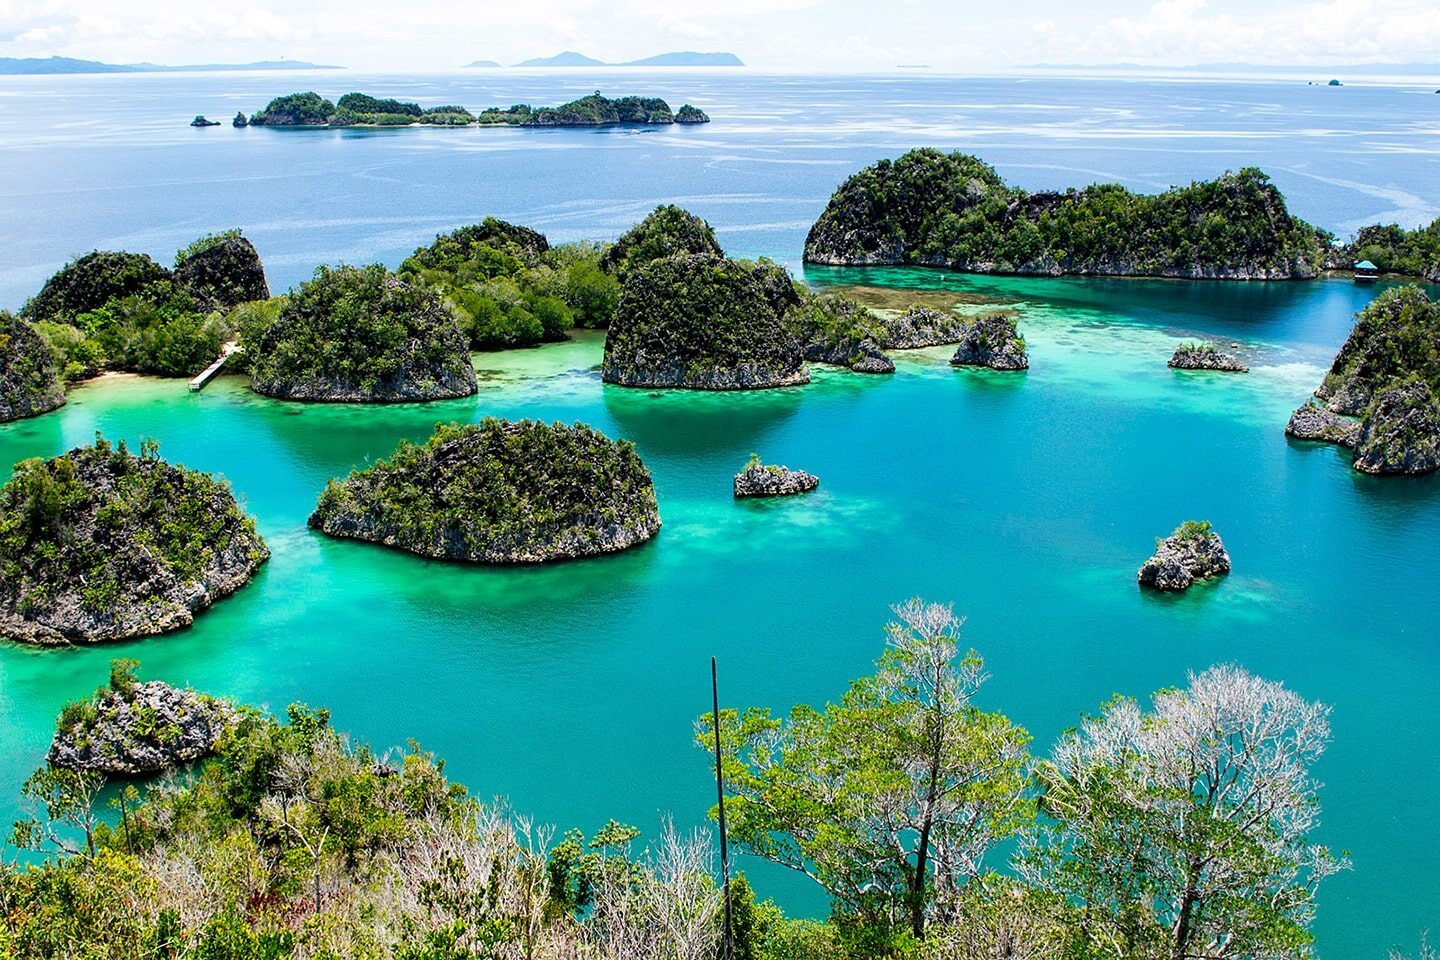 Boat stopover to see the Stunning view of Raja Ampat Islands